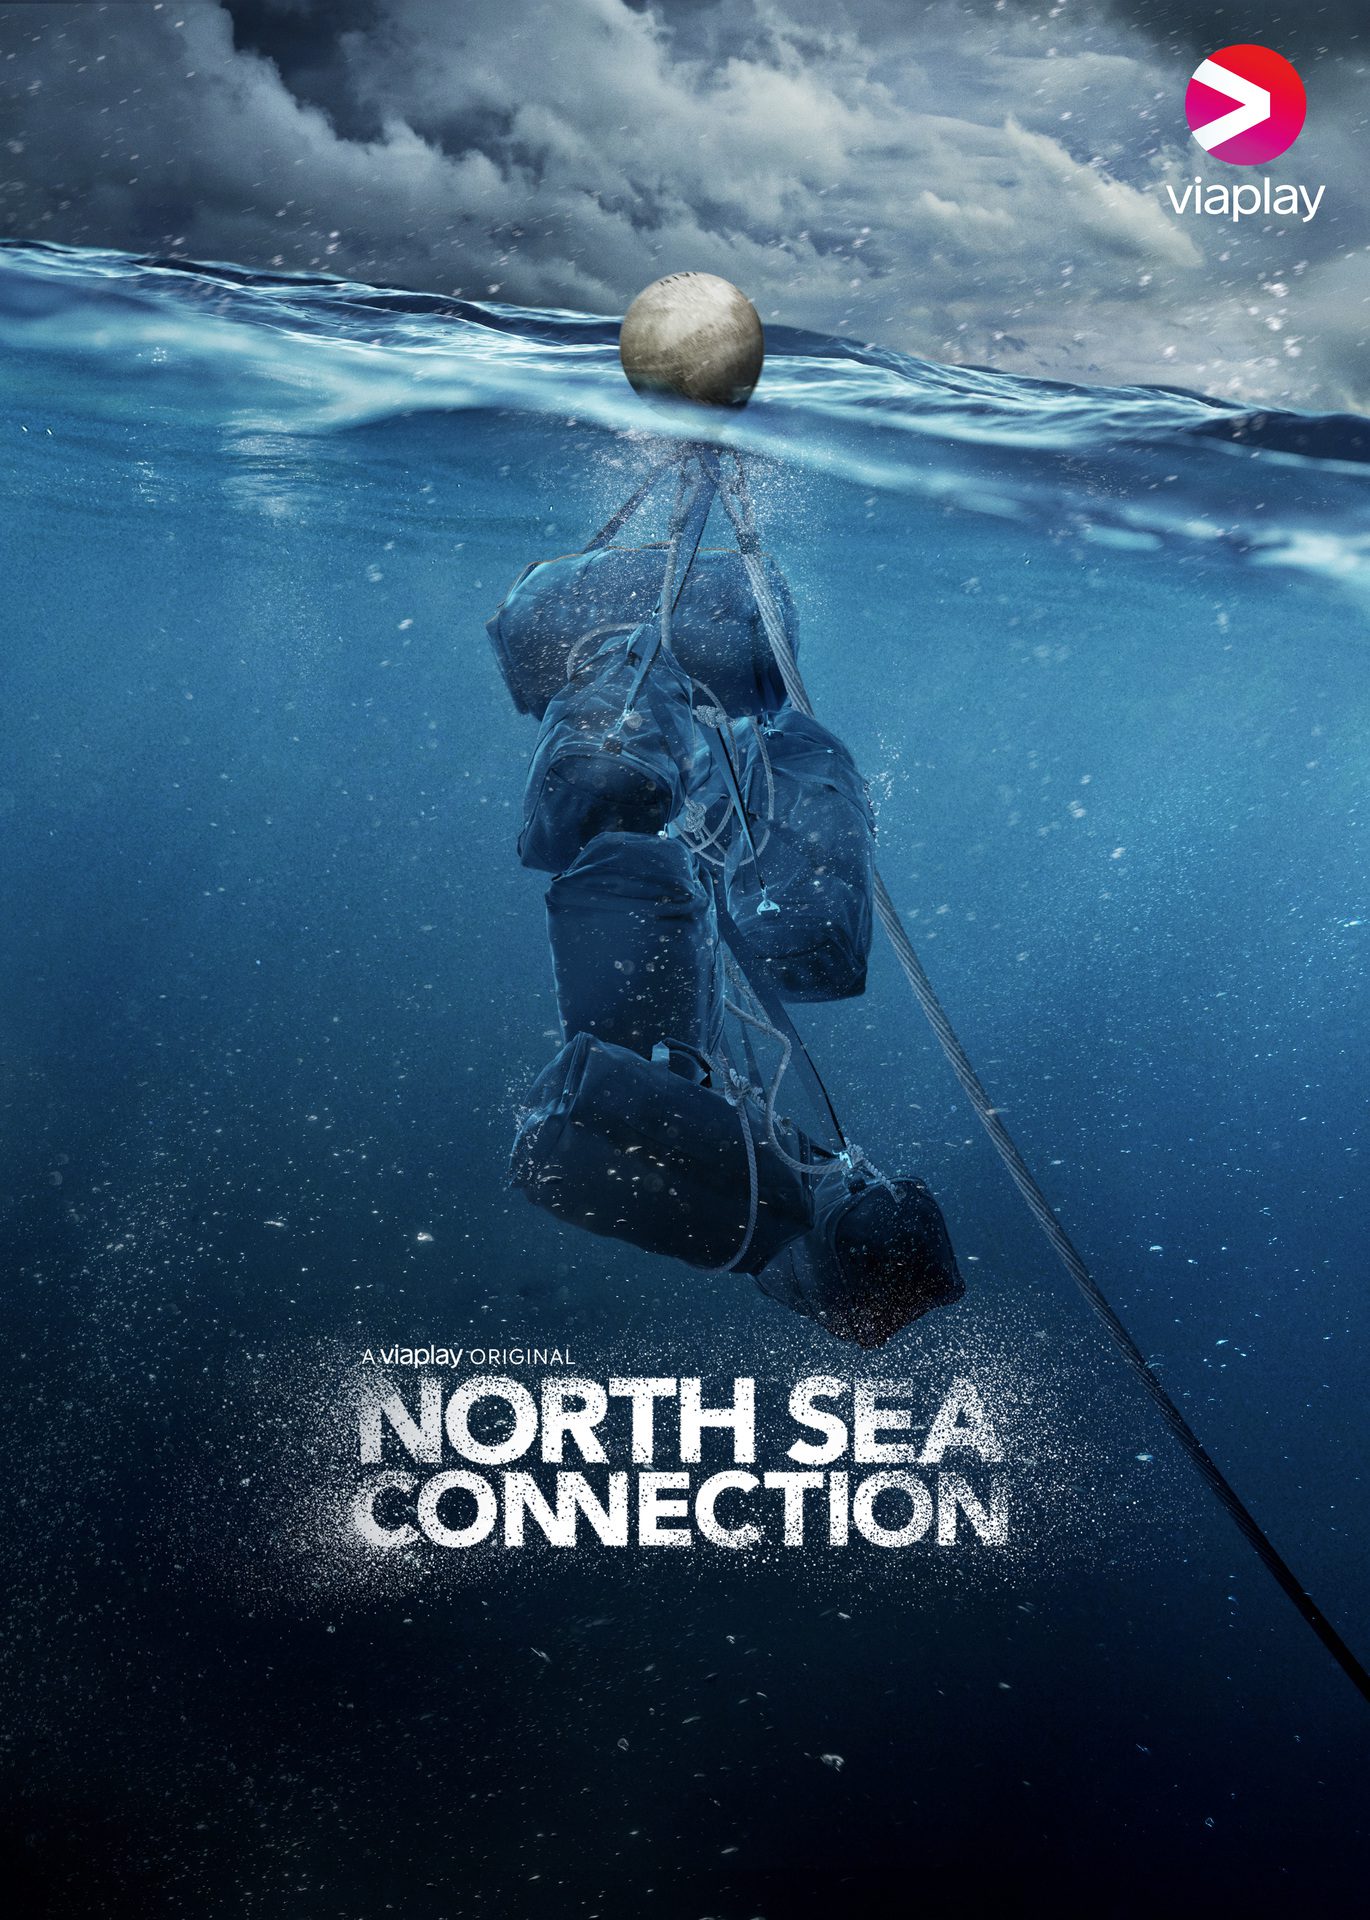 North Sea Connection Episode 3: Will Somebody Face The Detective And Police Now?